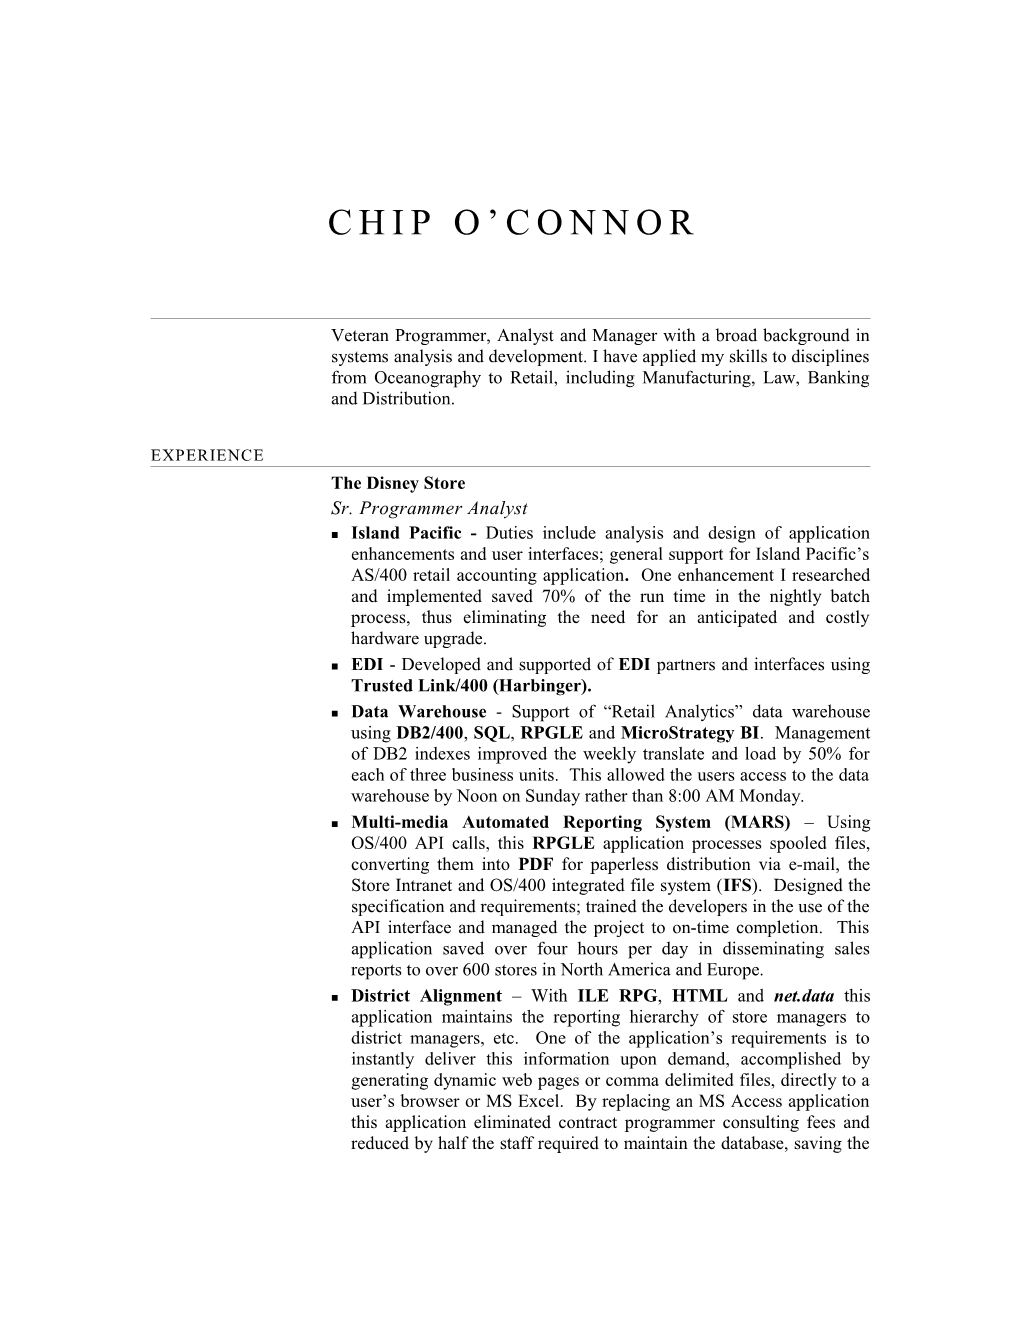 Resume of Chip O'connor